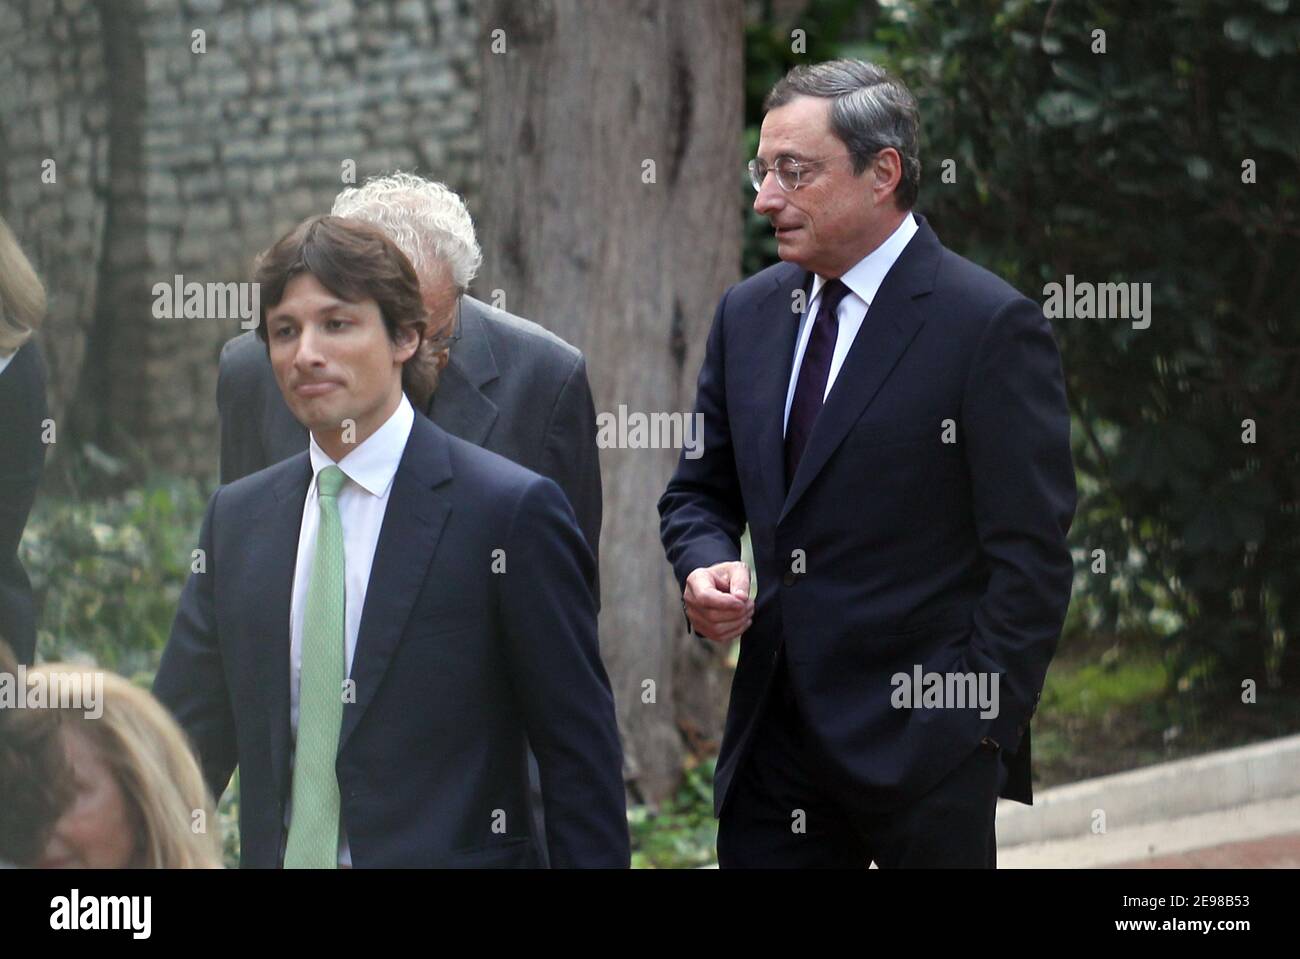 Roma Mario Draghi, President of the European Central Bank from 1 November 2011, with his family, his wife Serena Hat (white coat) and his son James, participating in the naming ceremony of his nephew in the church of St. Agnes in Rome. Mario Draghi speaks before the ceremony with a priest and confess it seems. exclusve Stock Photo